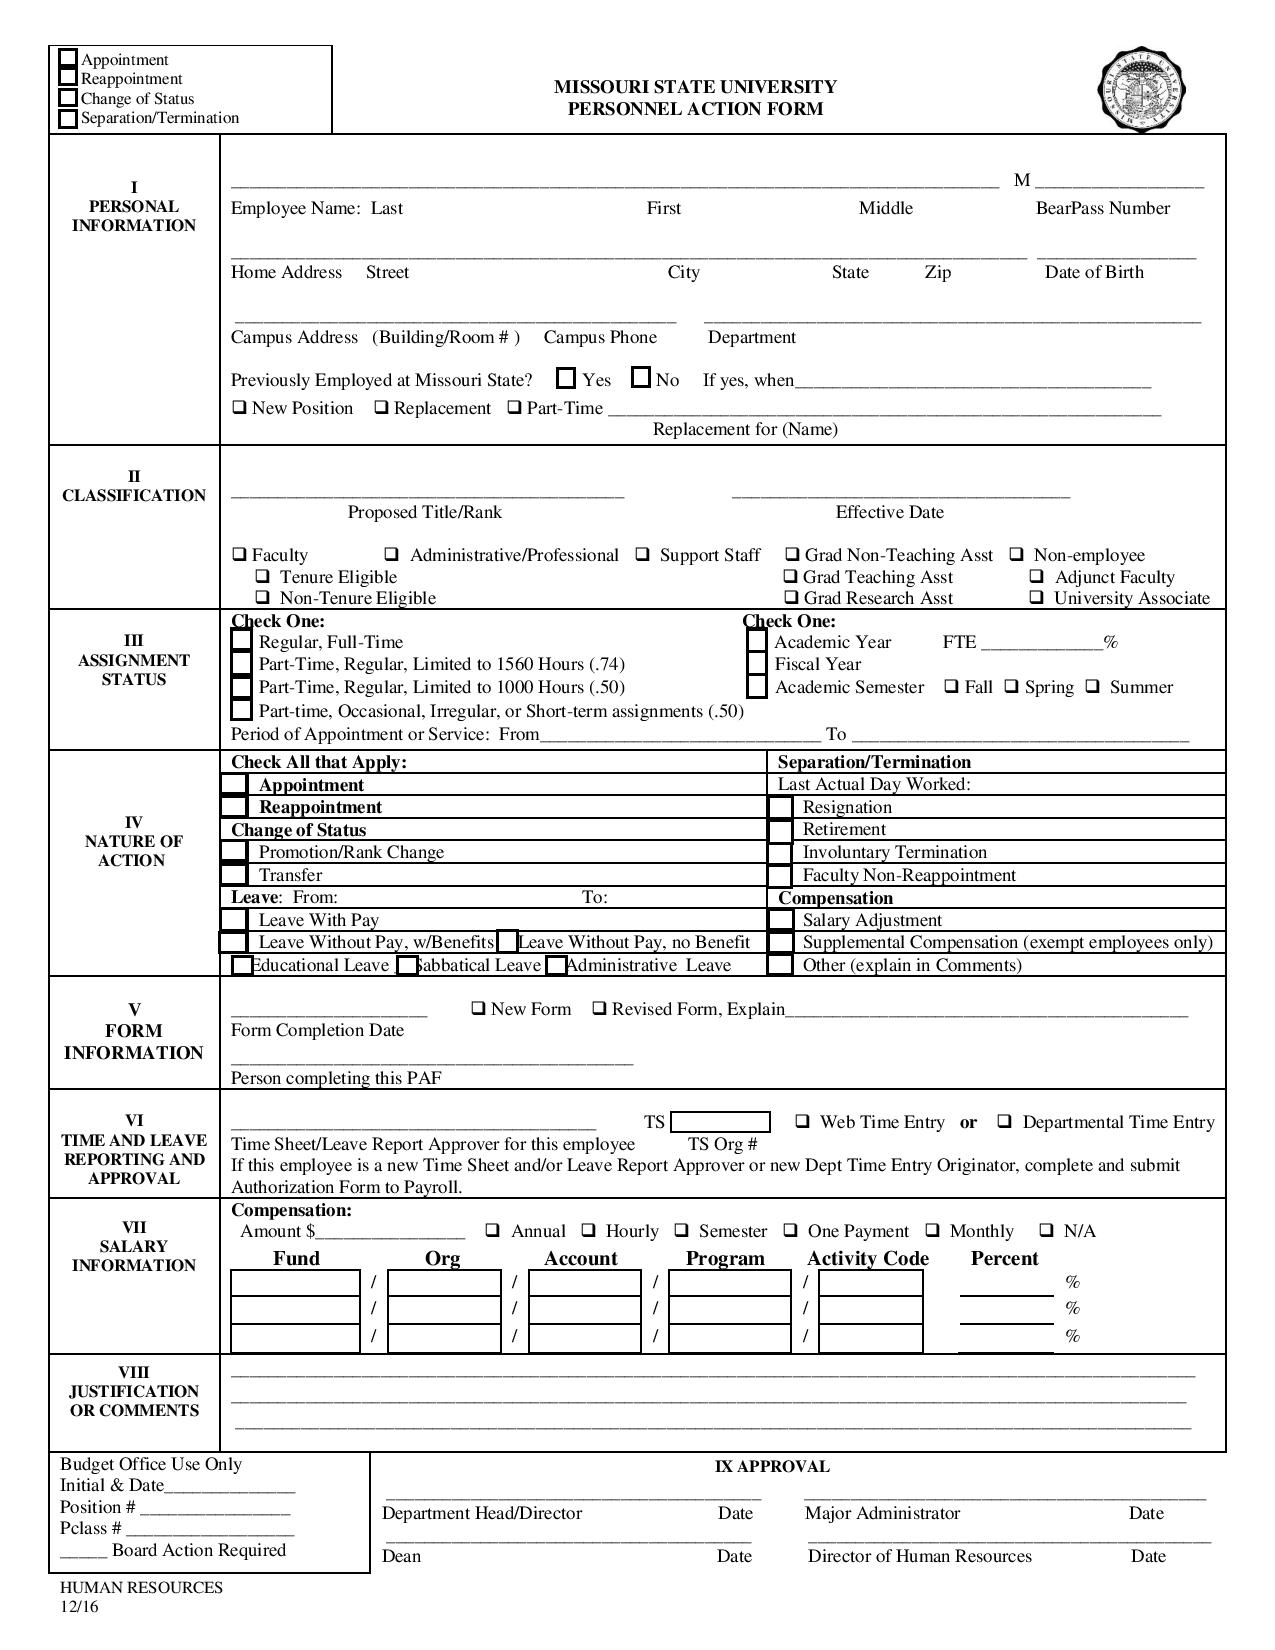 personnel action form in pdf page 001